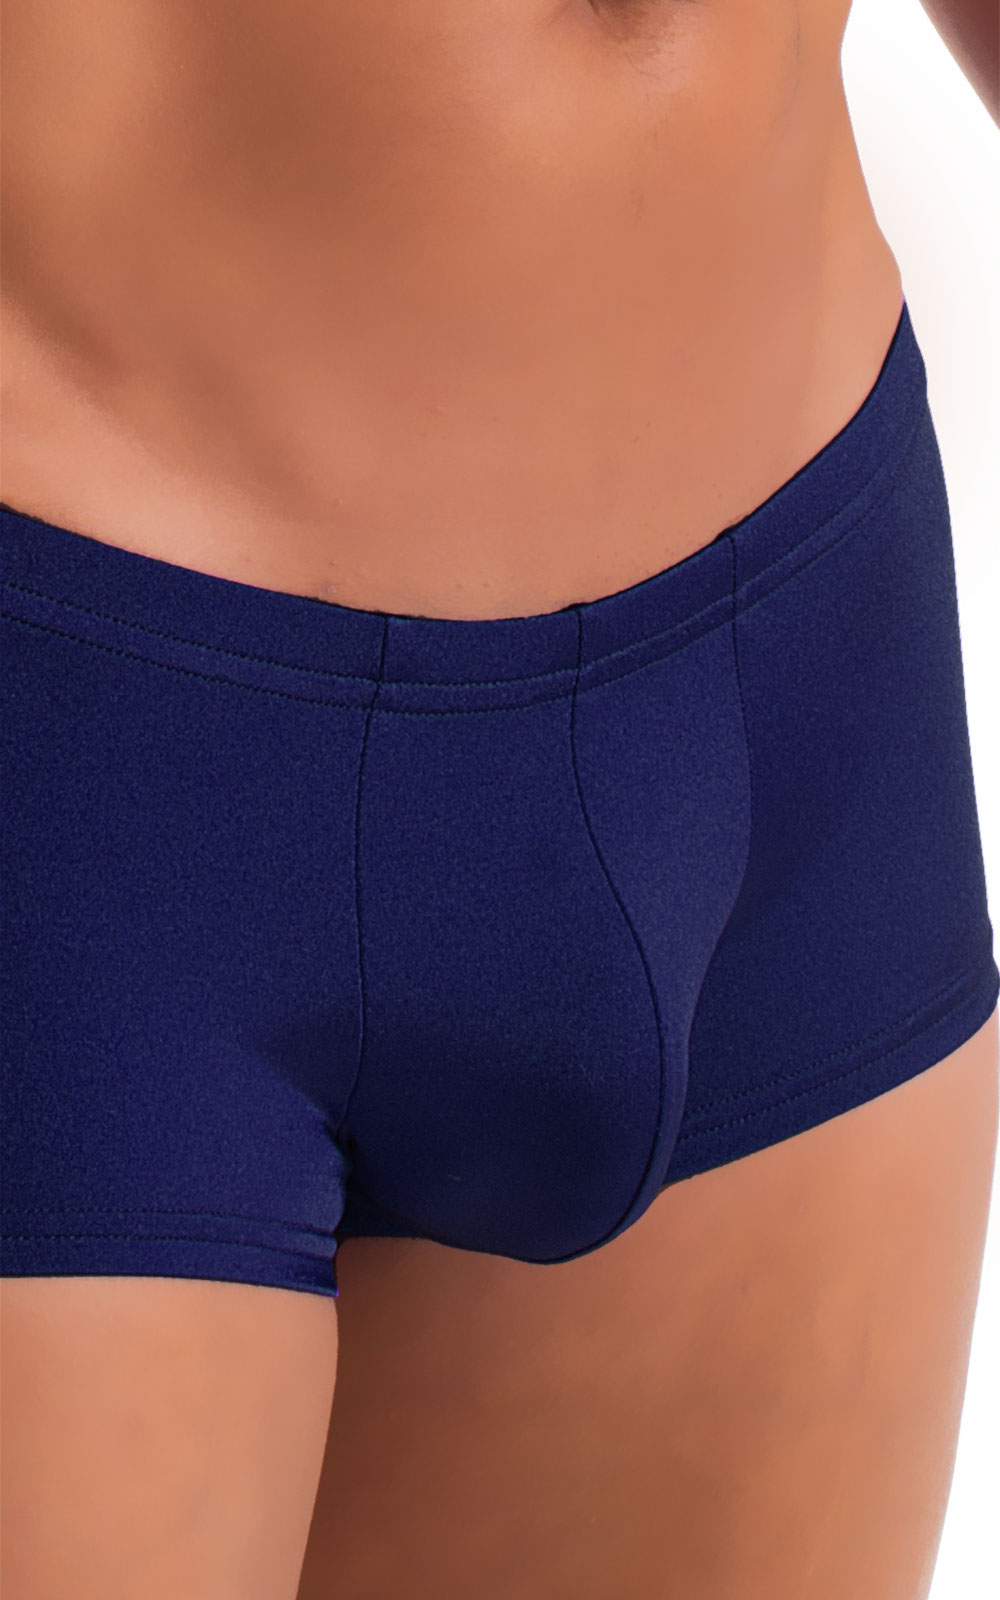 Fitted Pouch - Boxer - Swim Trunks in ThinSkinz Navy Blue 3